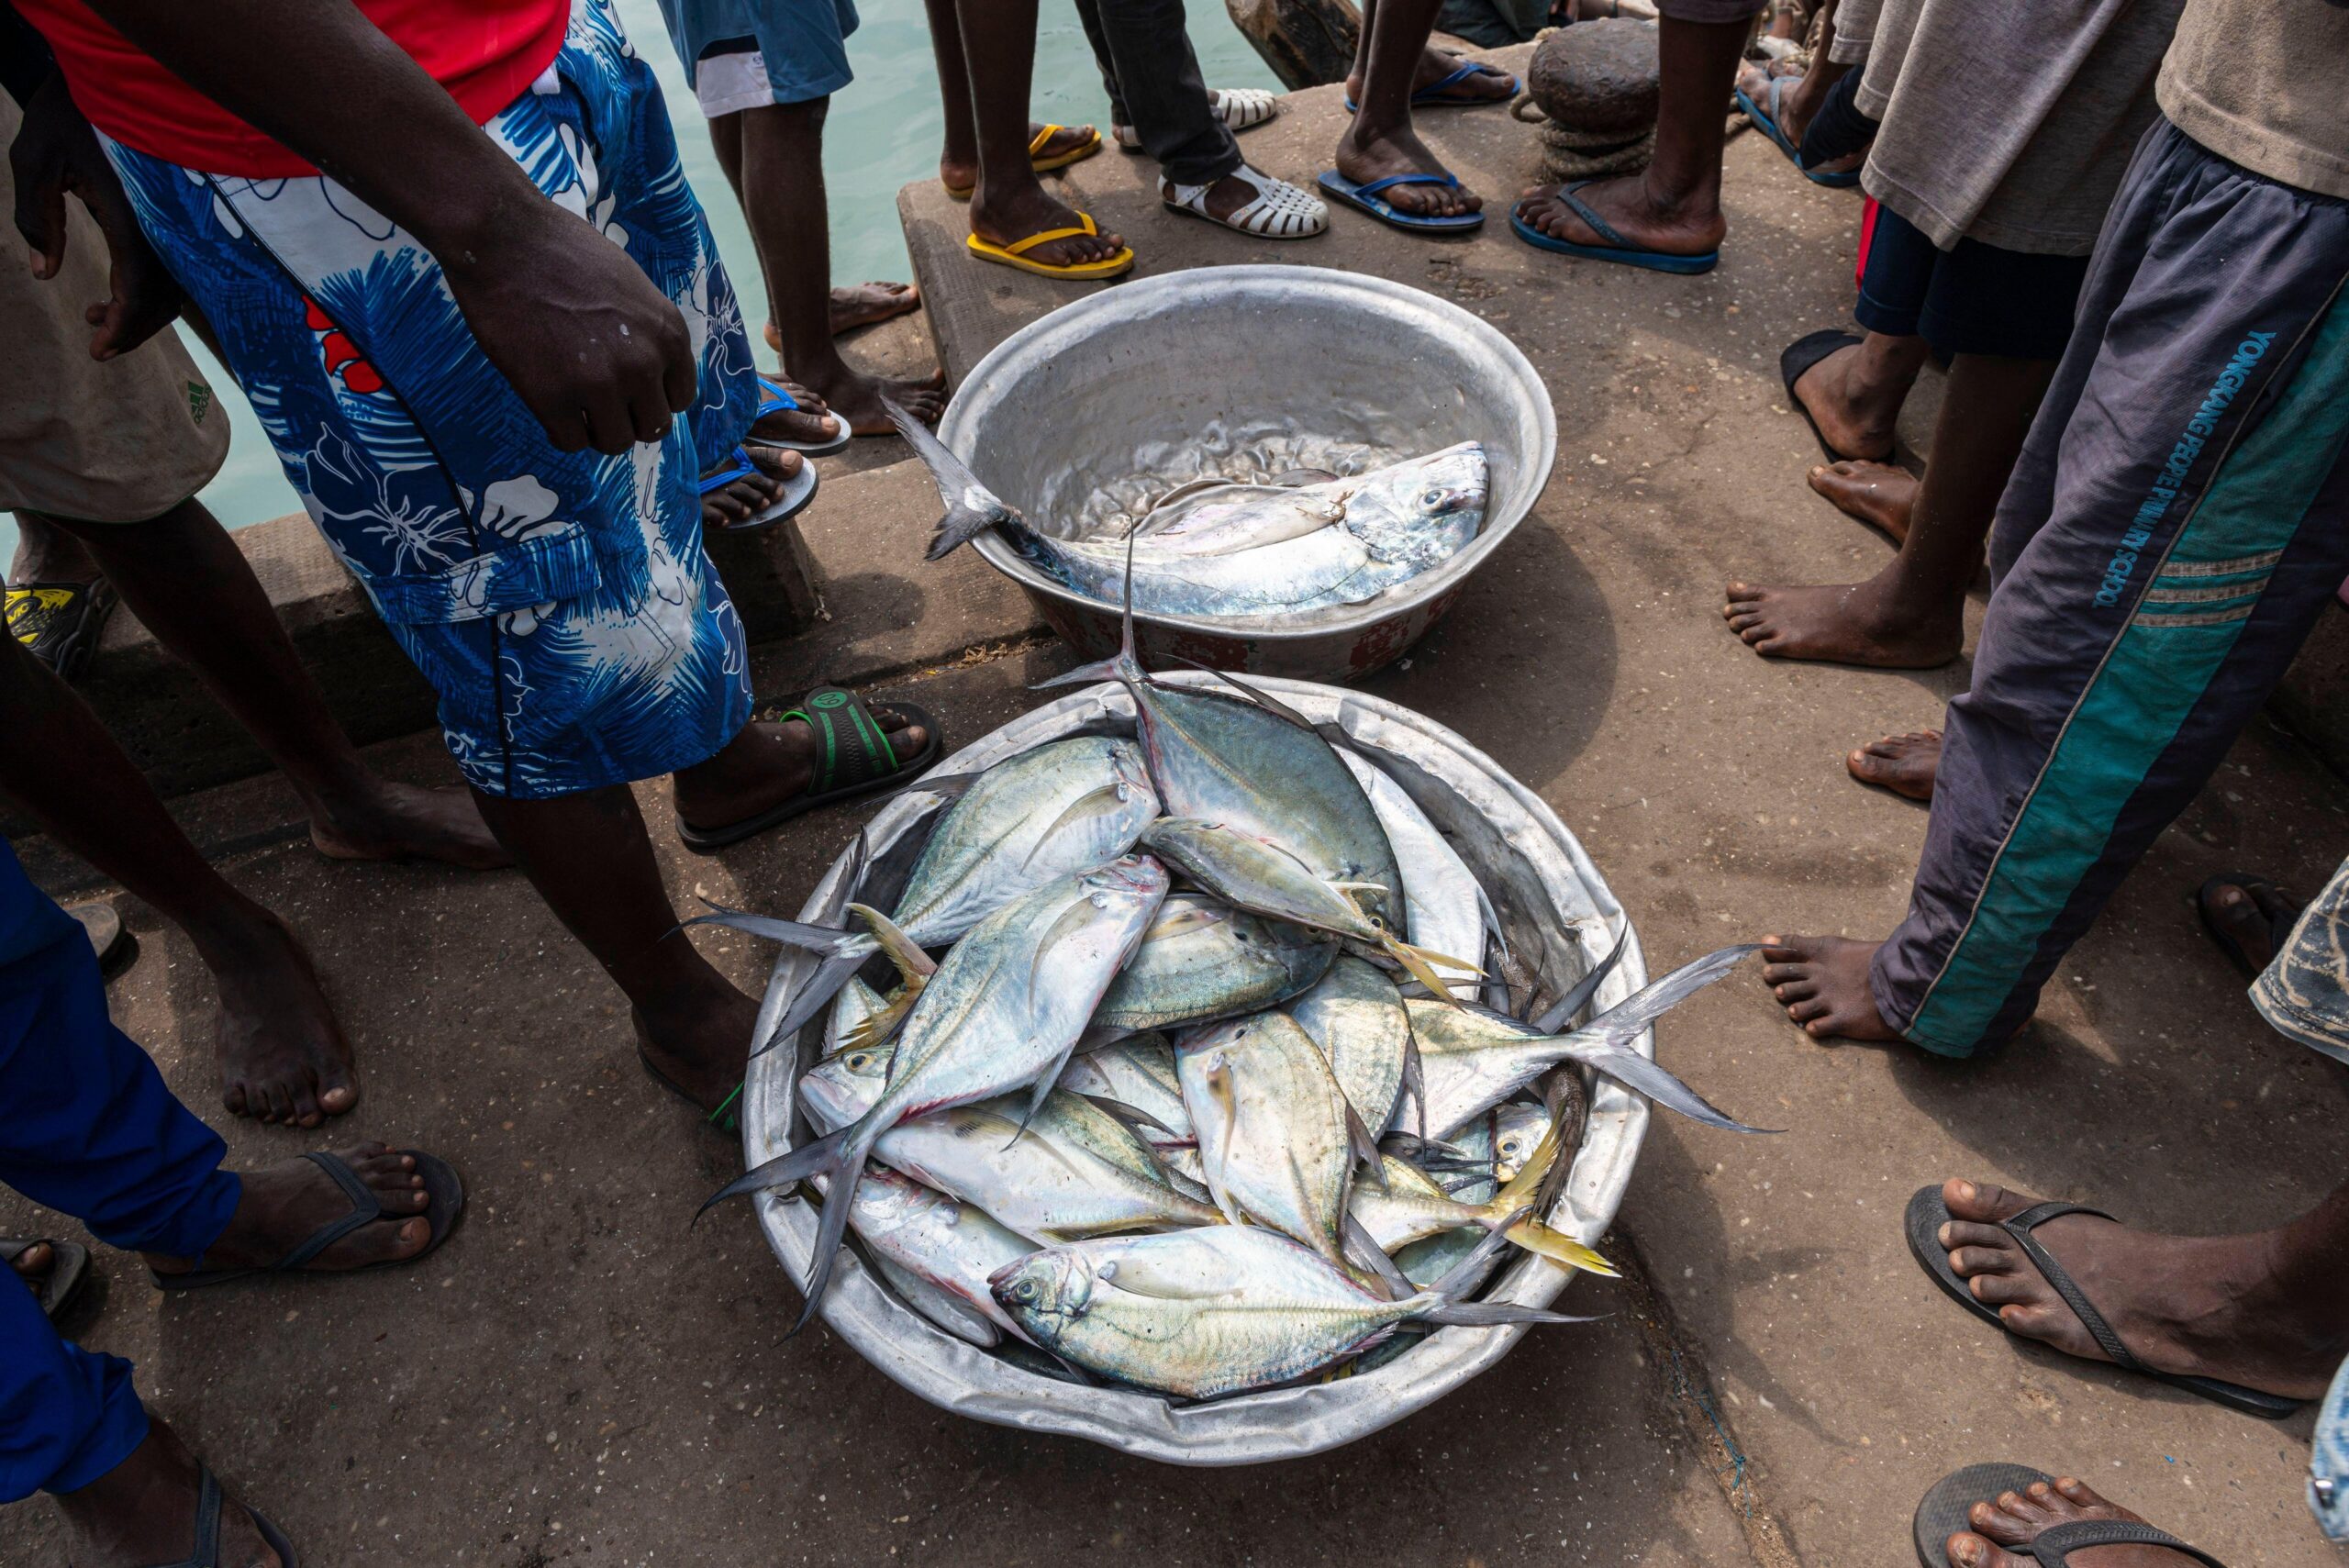 Global Fishing Watch welcomes partnership with Benin to combat illegal fishing